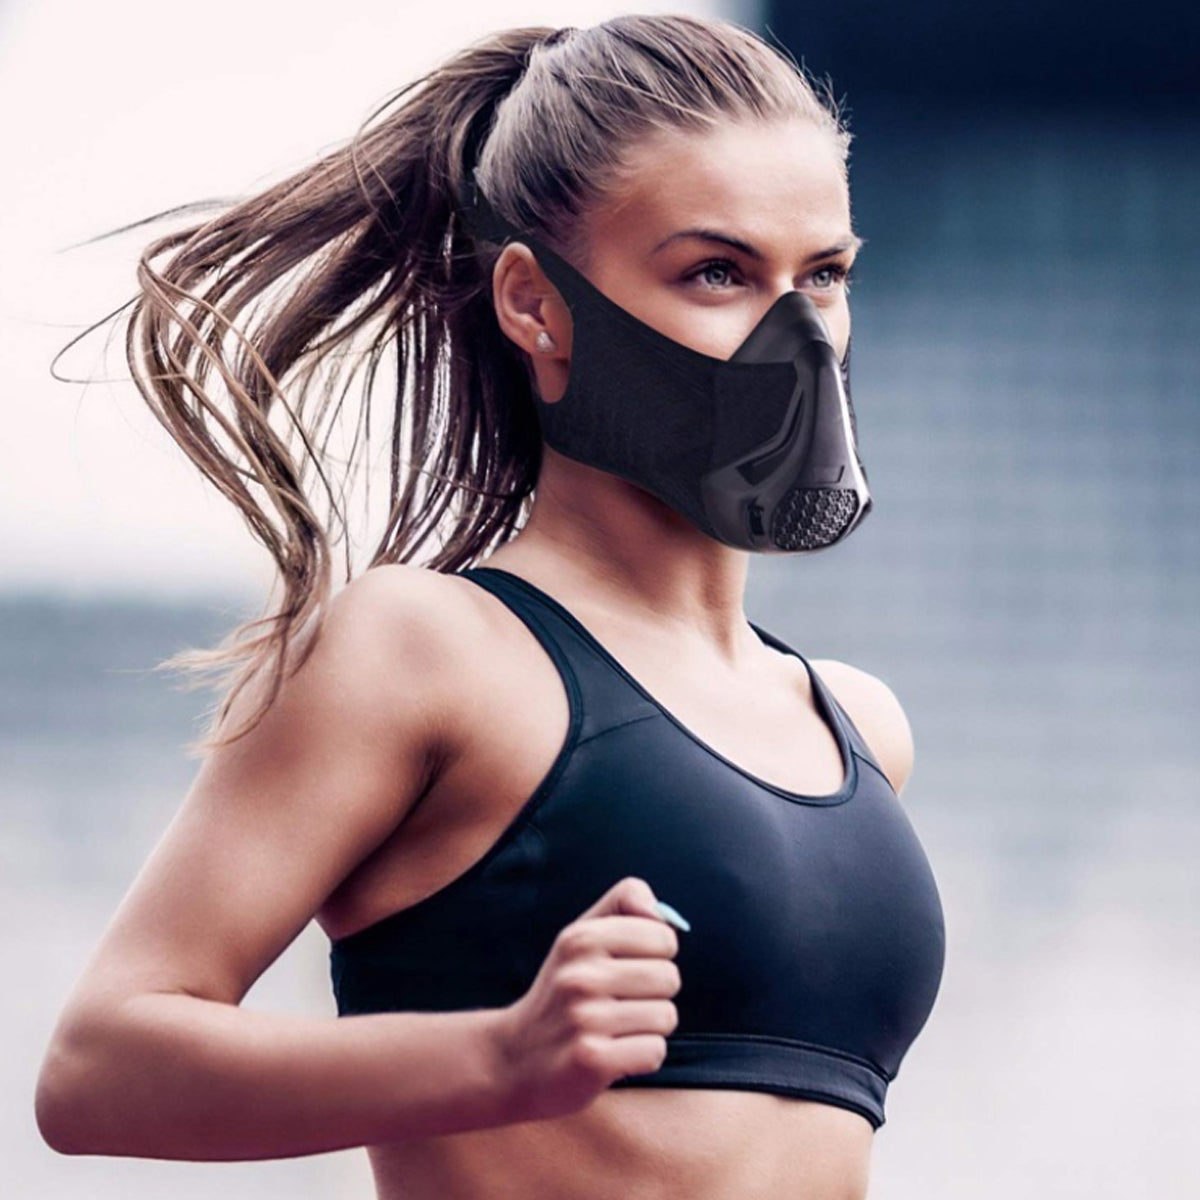 Elevation Resistance Training Cardio Workout Sports Mask With 24 levels - USA Medical Supply